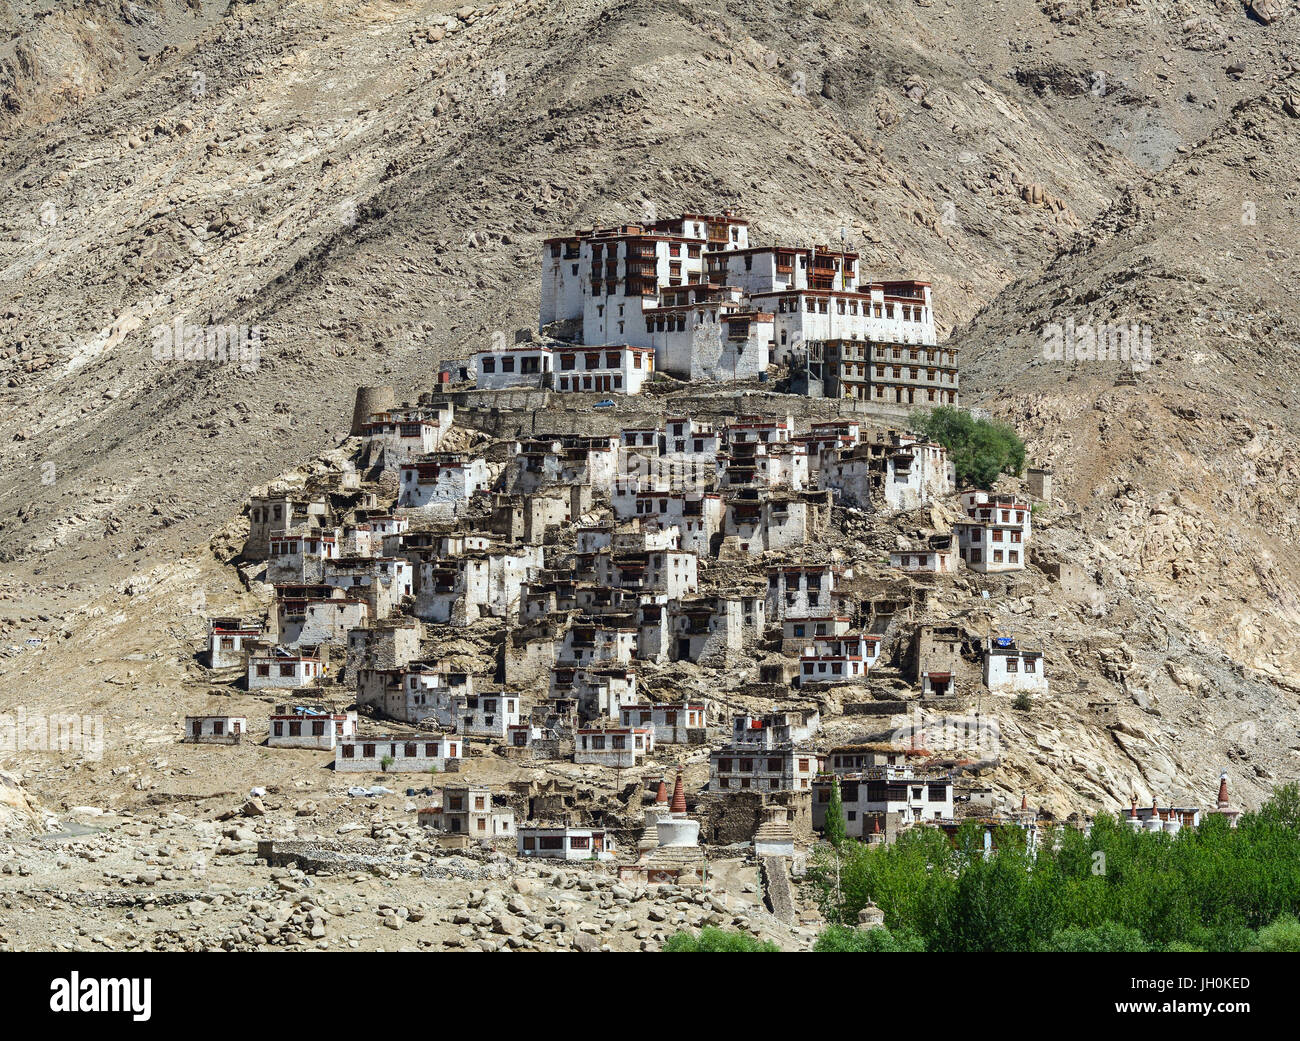 Thiksey Gompa in Ladakh, India. The Monastery is noted for its resemblance to the Potala Palace in Lhasa, Tibet and is the largest gompa in central La Stock Photo